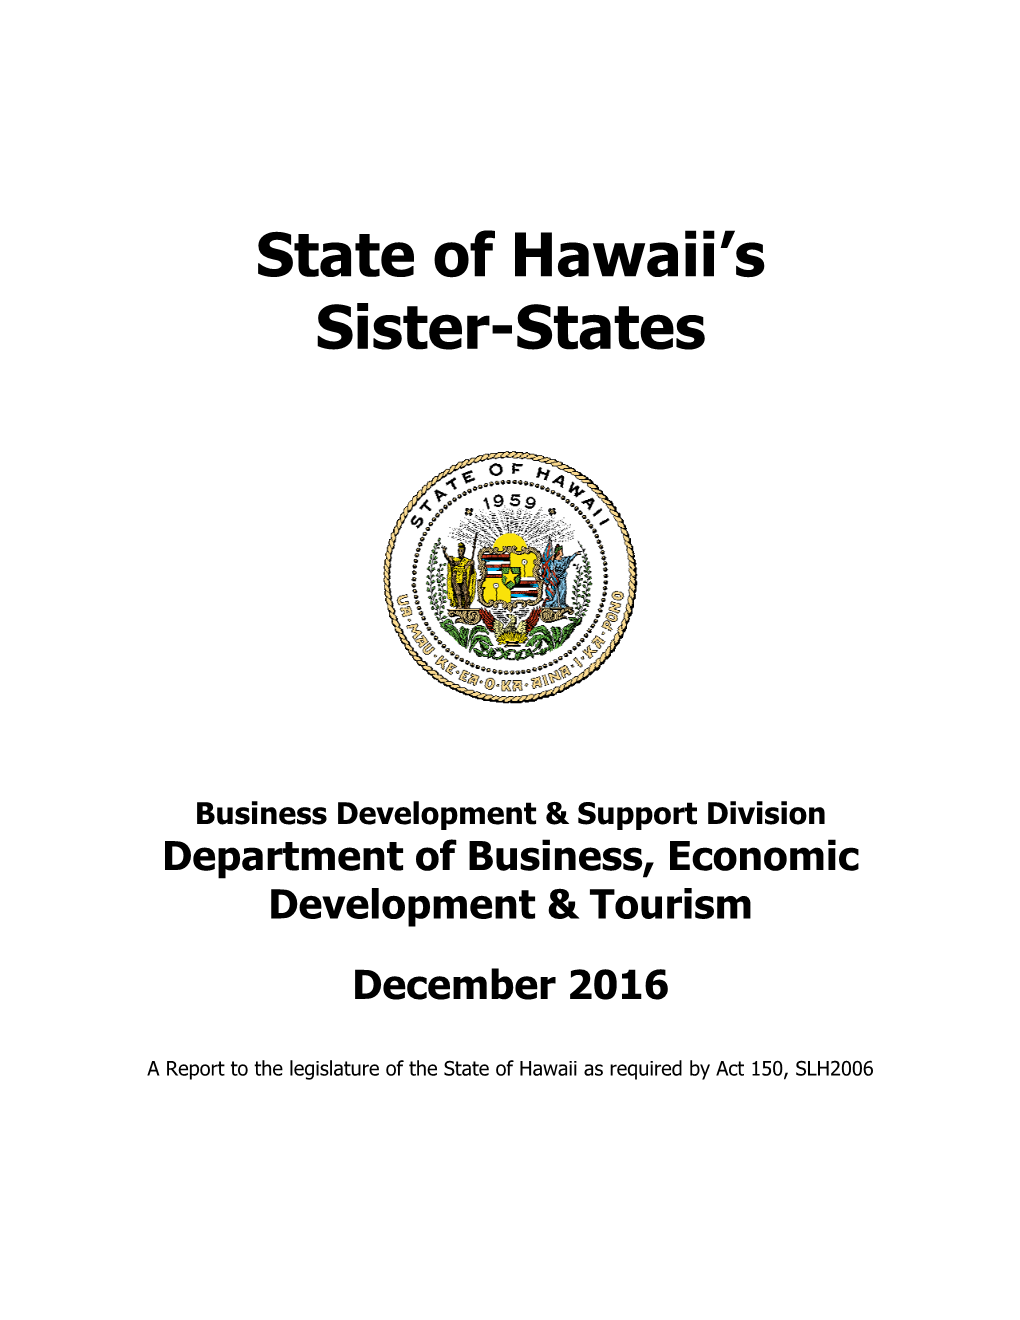 2016 State of Hawaii's Sister-States